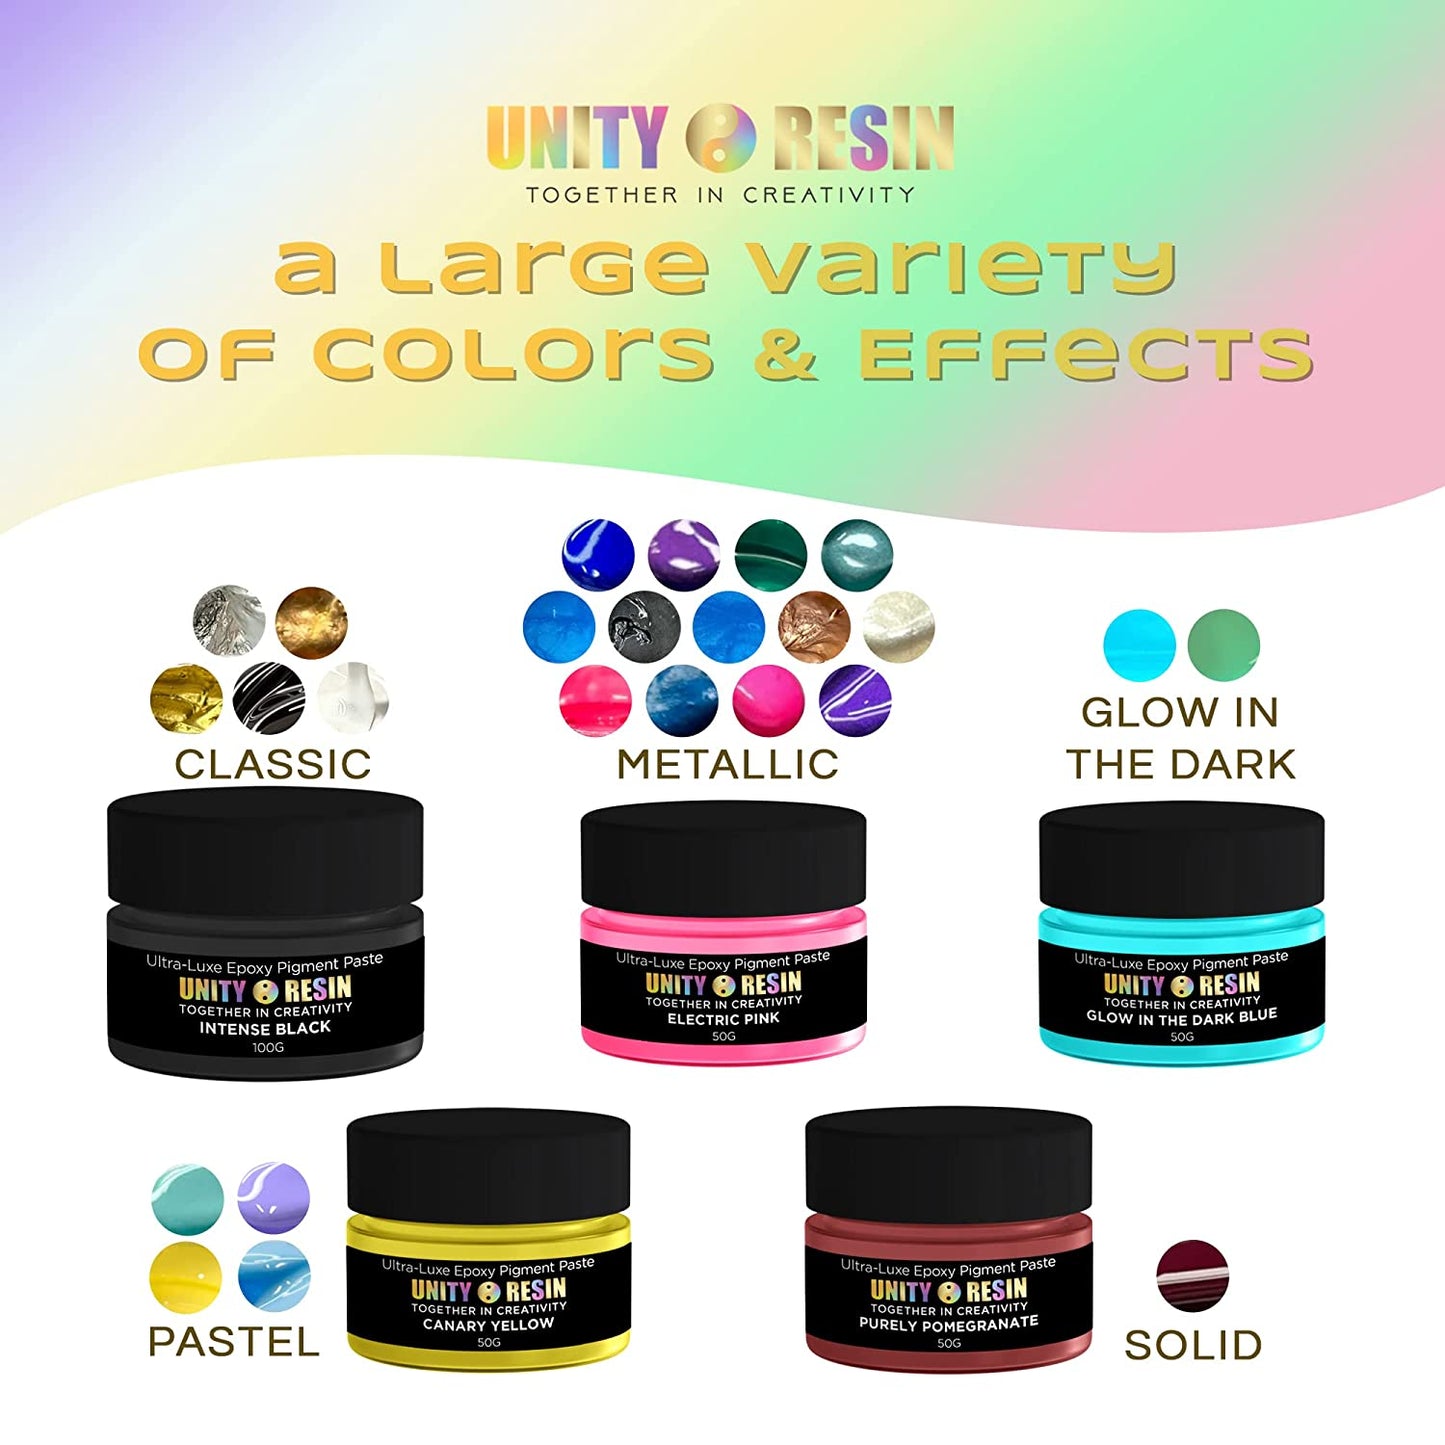 Ultra-Luxe Epoxy Resin Pigment Paste-PEARL (50G).